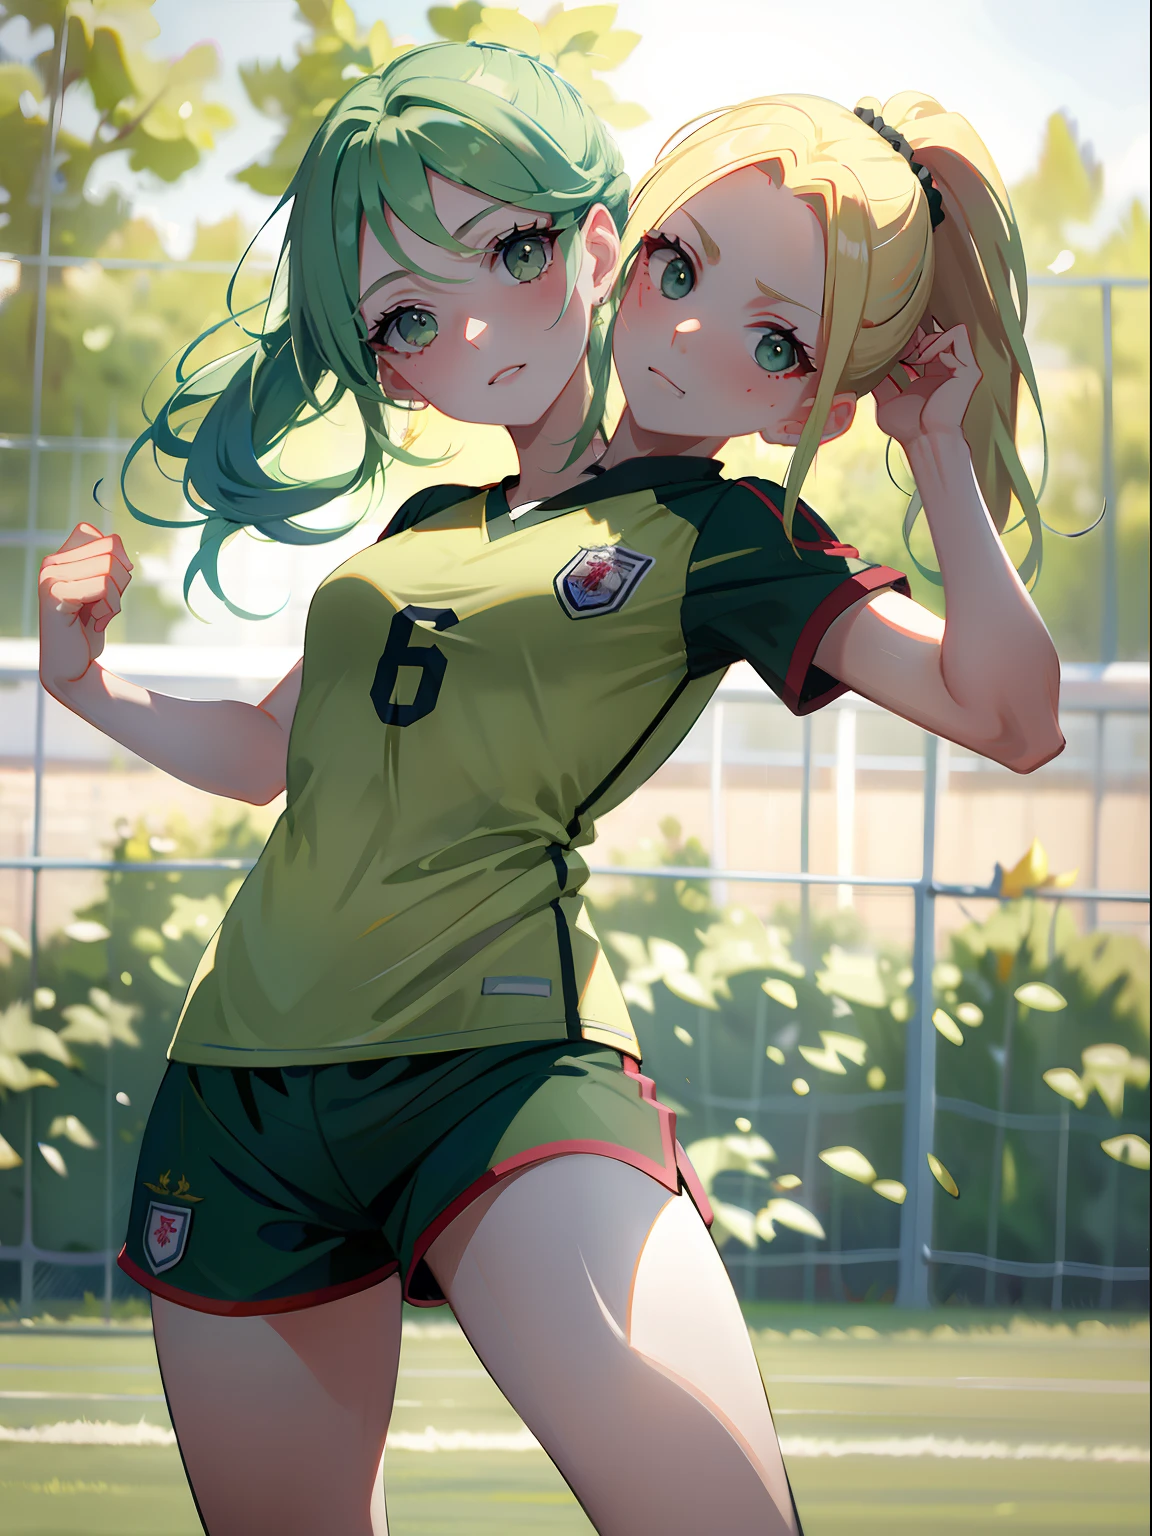 (masterpiece, best quality), best resolution, (2heads:1.5), 1girl, weary, headache, hangover, in pain, dizzy, blond hair, different-coloured hair, ponytail, green eyes, focused, soccer uniform, playing soccer, soccer field, day